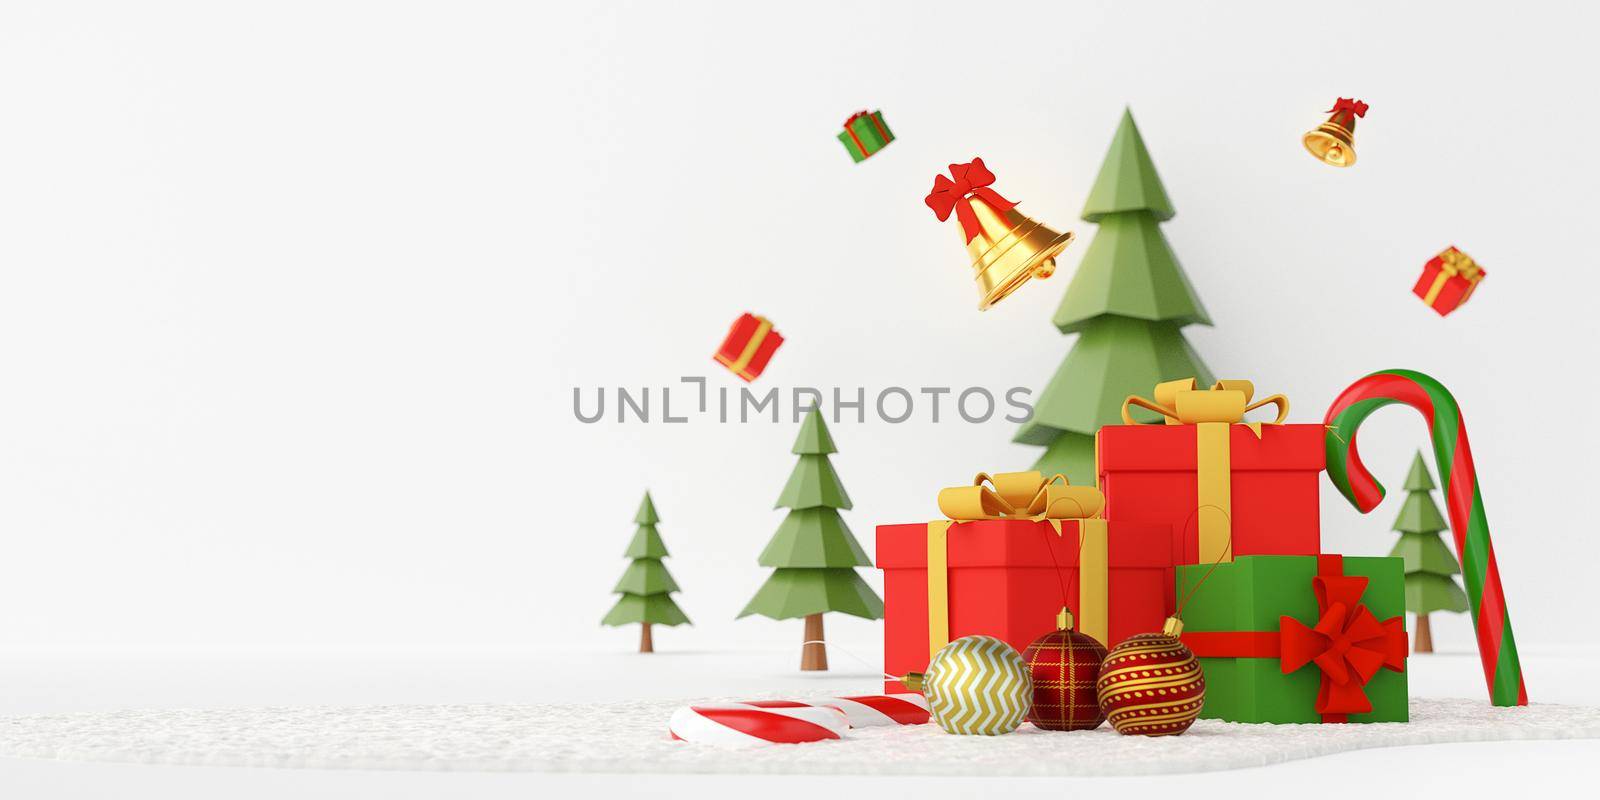 Christmas banner, Christmas presents and ornaments on a snow ground with pine tree behind, White background with copy space, 3d rendering by nutzchotwarut